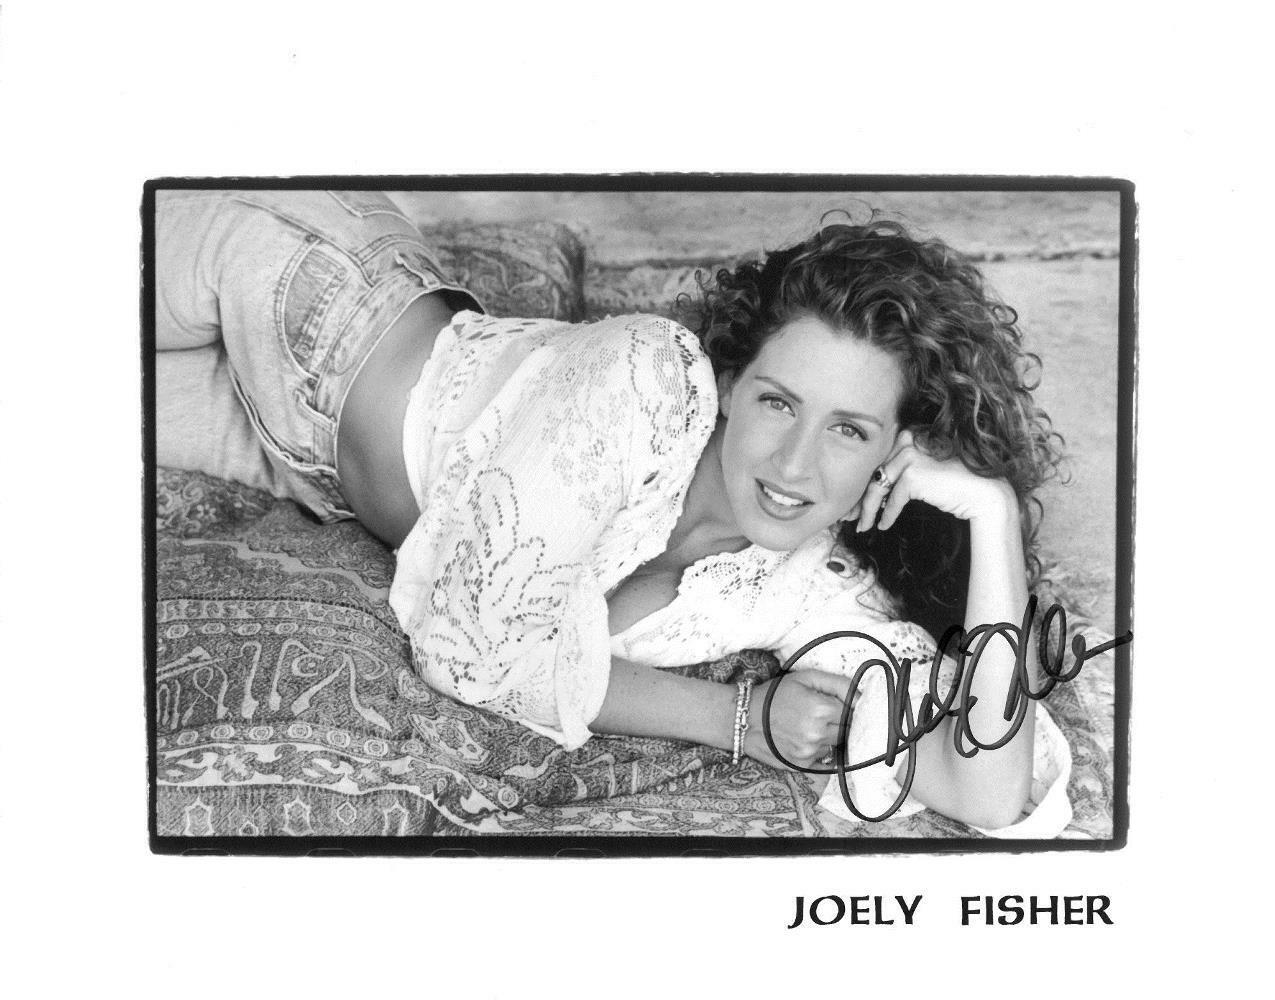 Joely Fisher Signed Authentic Autographed 8x10 B/W Photo Poster painting PSA/DNA #AE98637